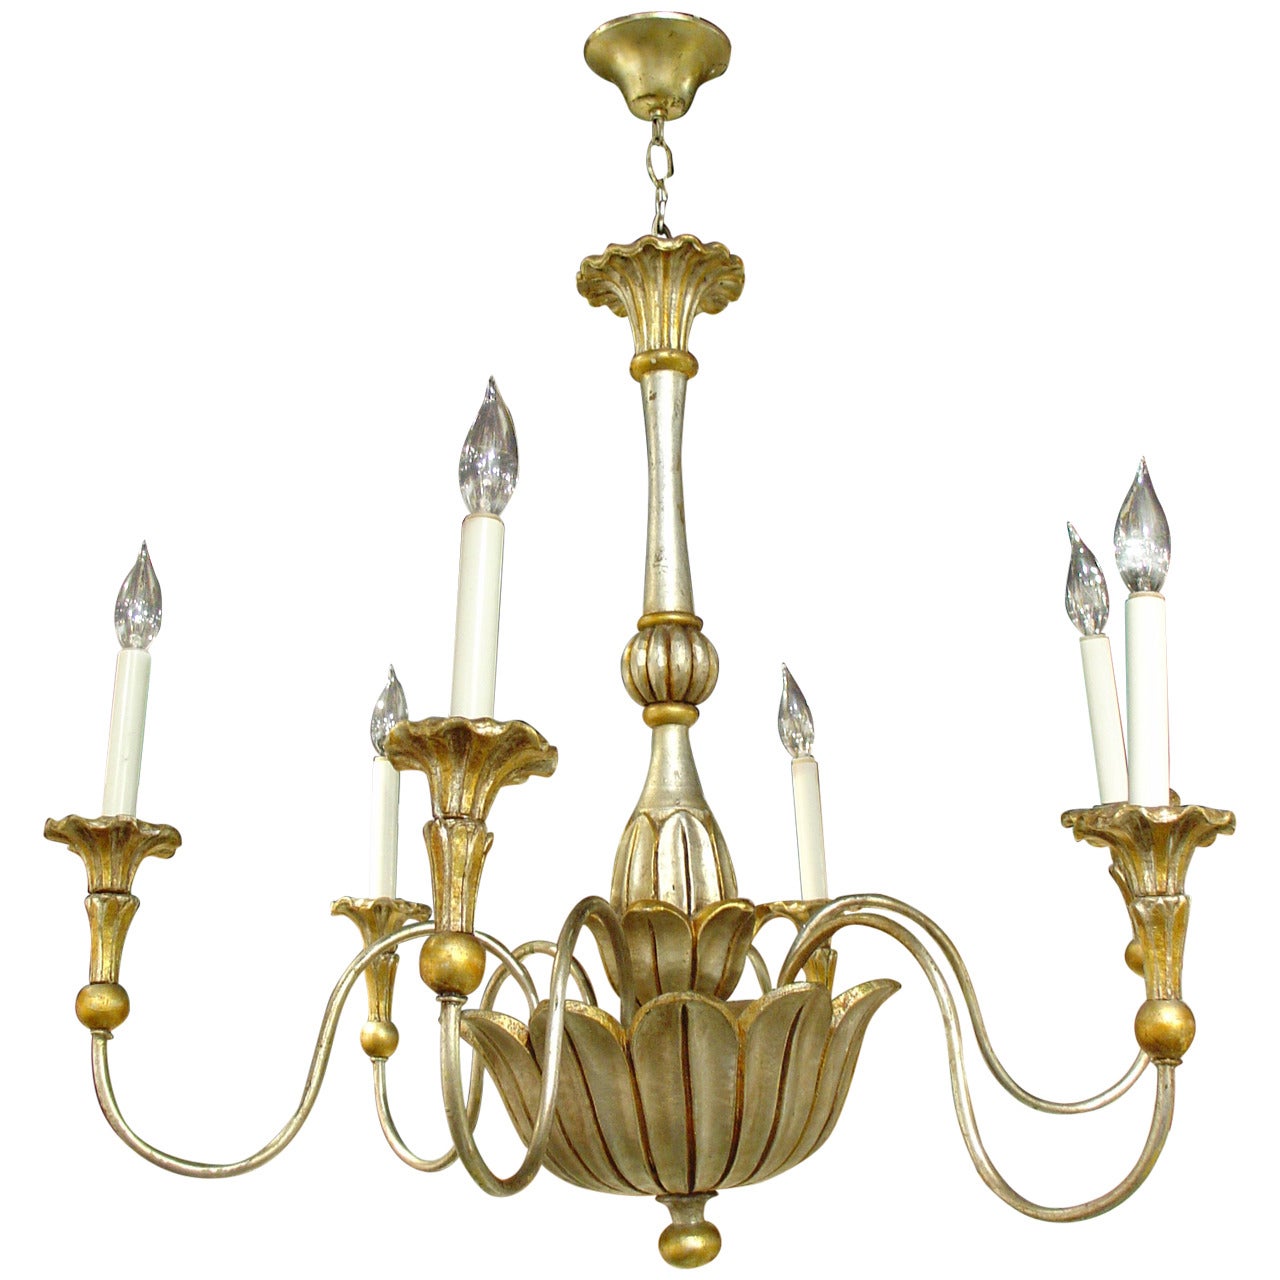 Elegant Six Arm Gold and Silver Gilded Chandelier from France, 20th Century